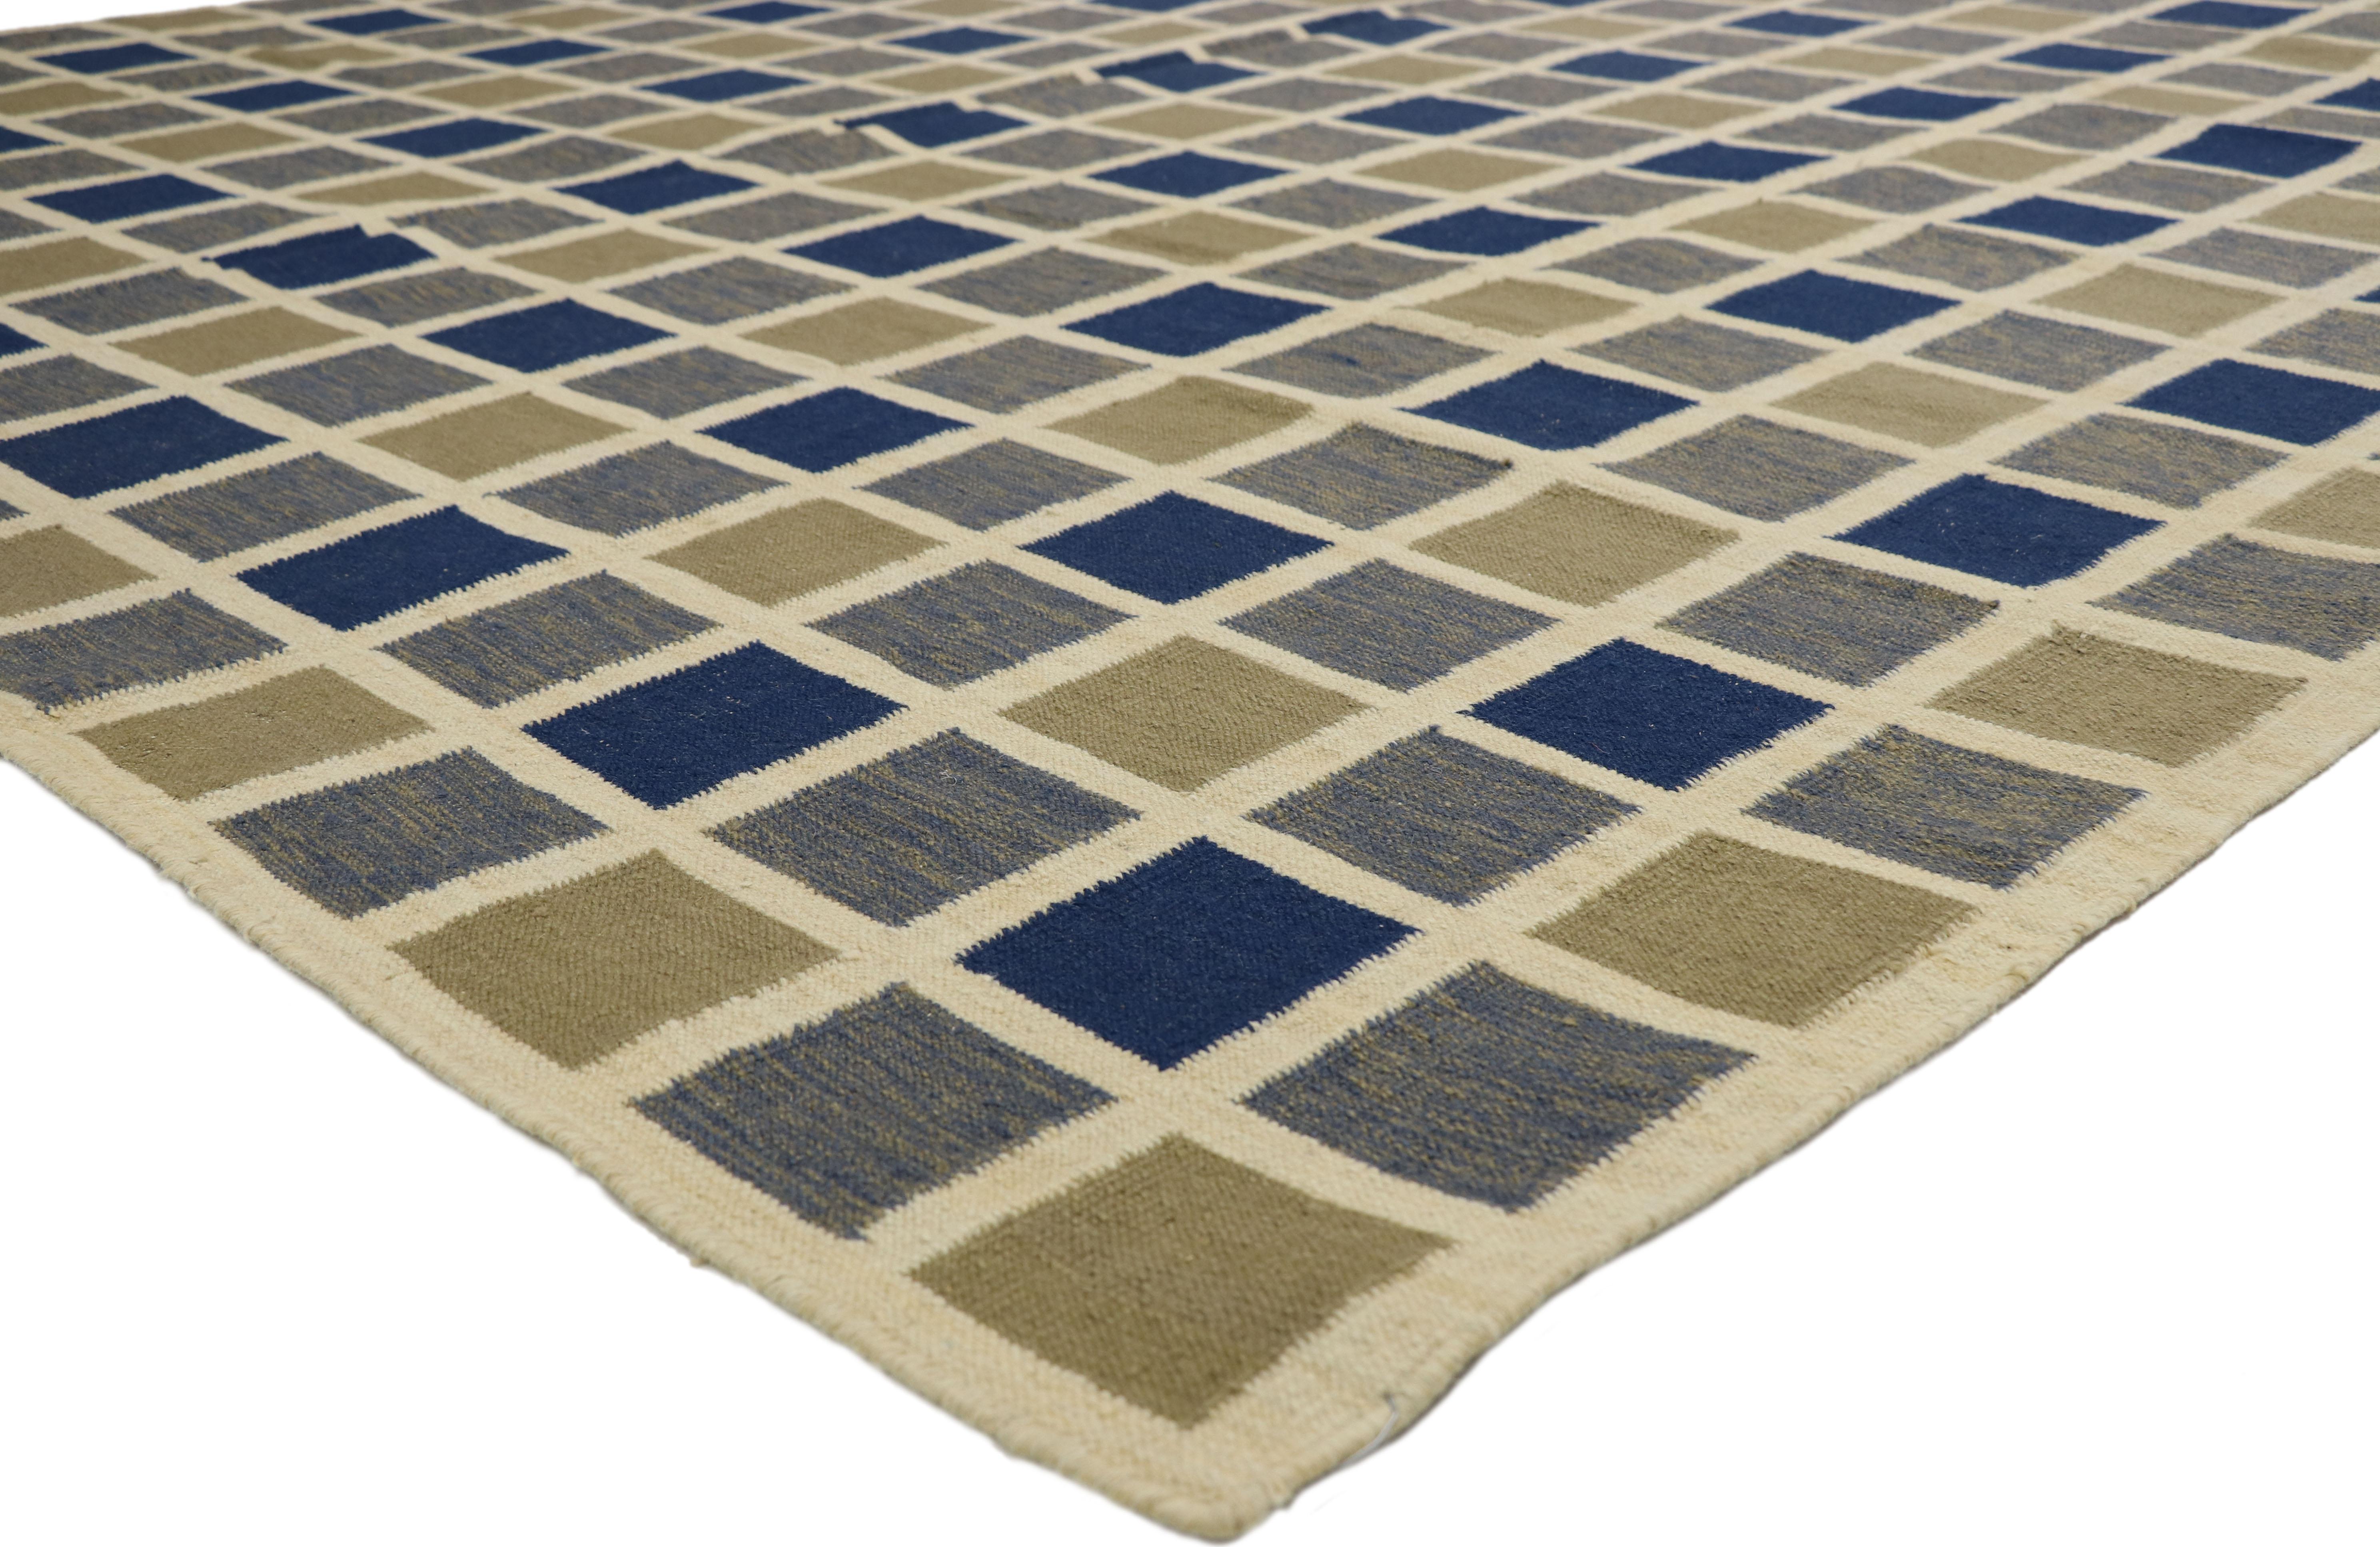 74923 Vintage Turkish Kilim Area Rug with Square Buffalo Plaid Pattern. With its all-over simple square buffalo plaid pattern, this hand-woven wool vintage Turkish kilim rug offers endless possibilities. The squares are rendered in variegated shades